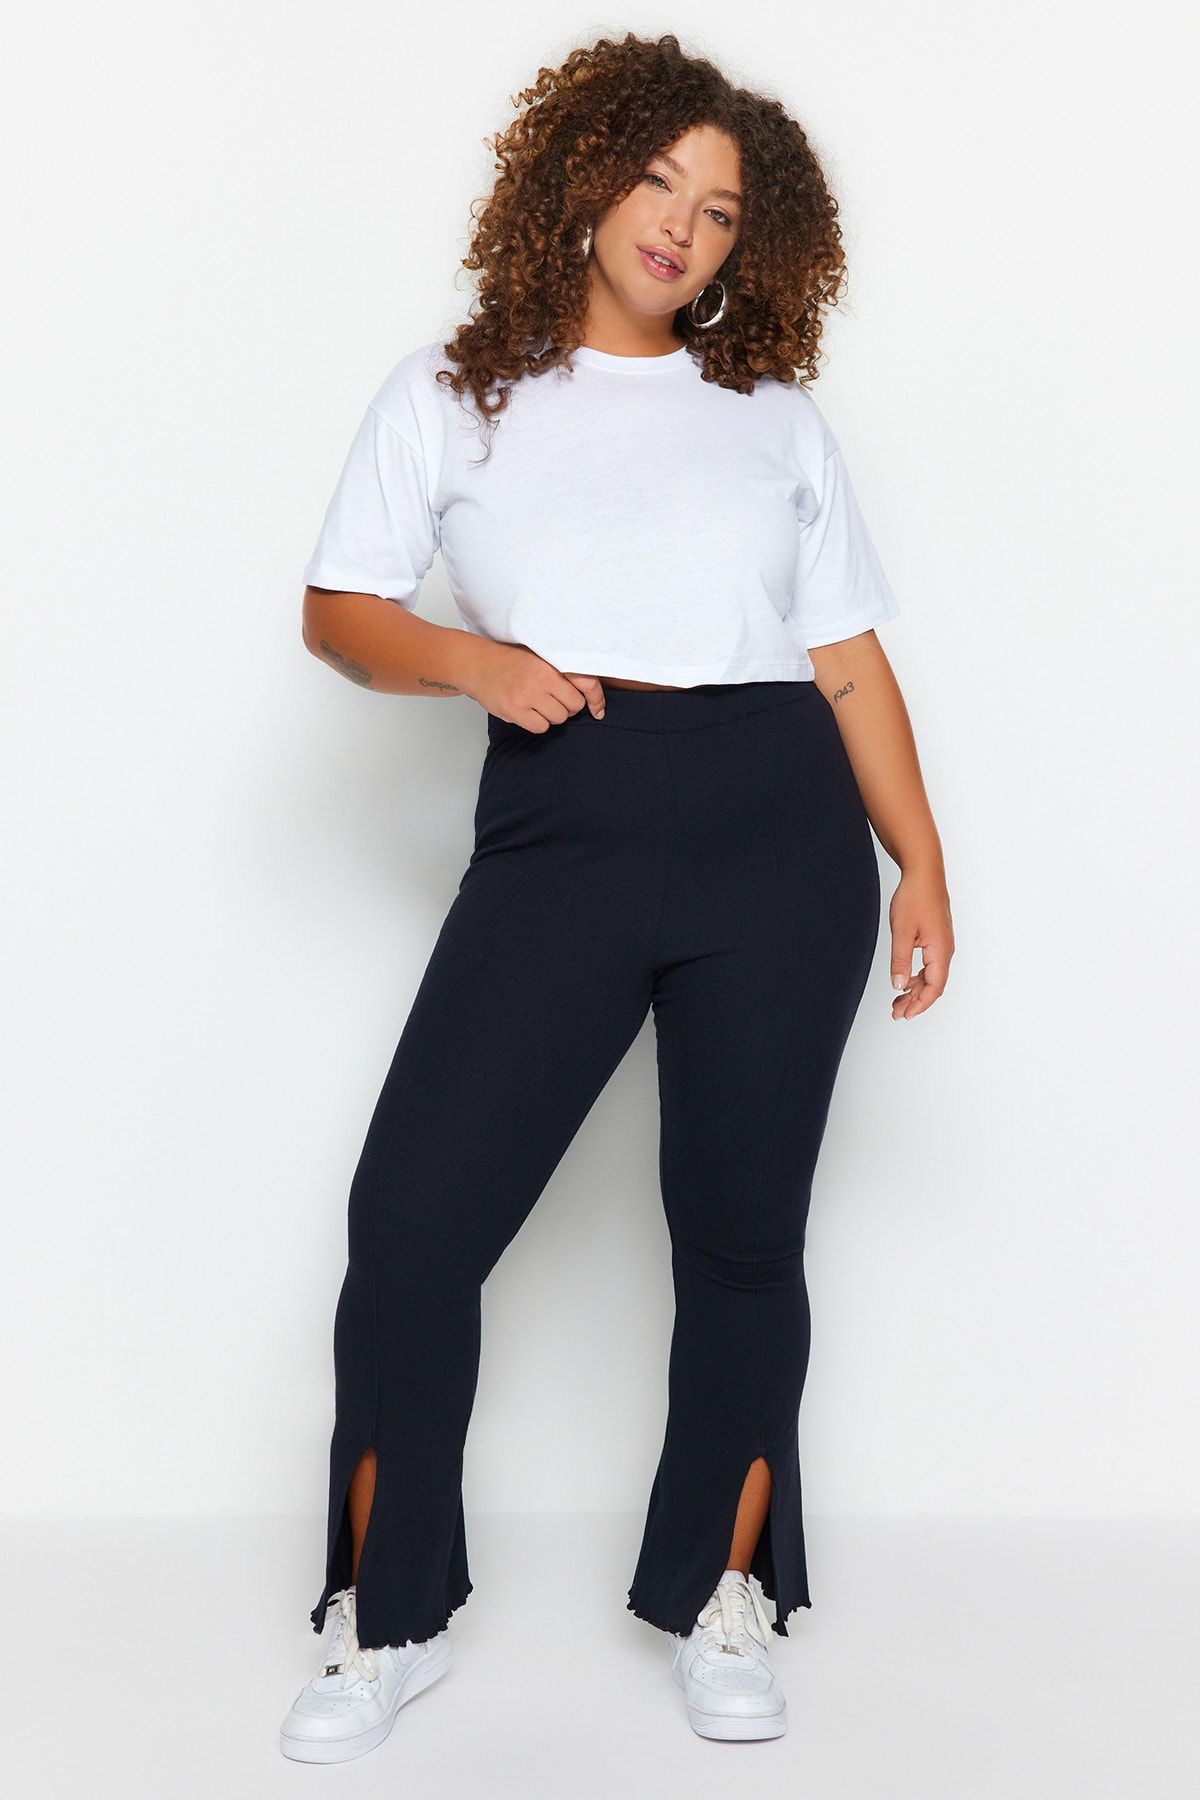 Plus Size Business Casual Pants, Women's Plus Solid Elastic High * Medium  Stretch Straight Leg Trousers With Pockets